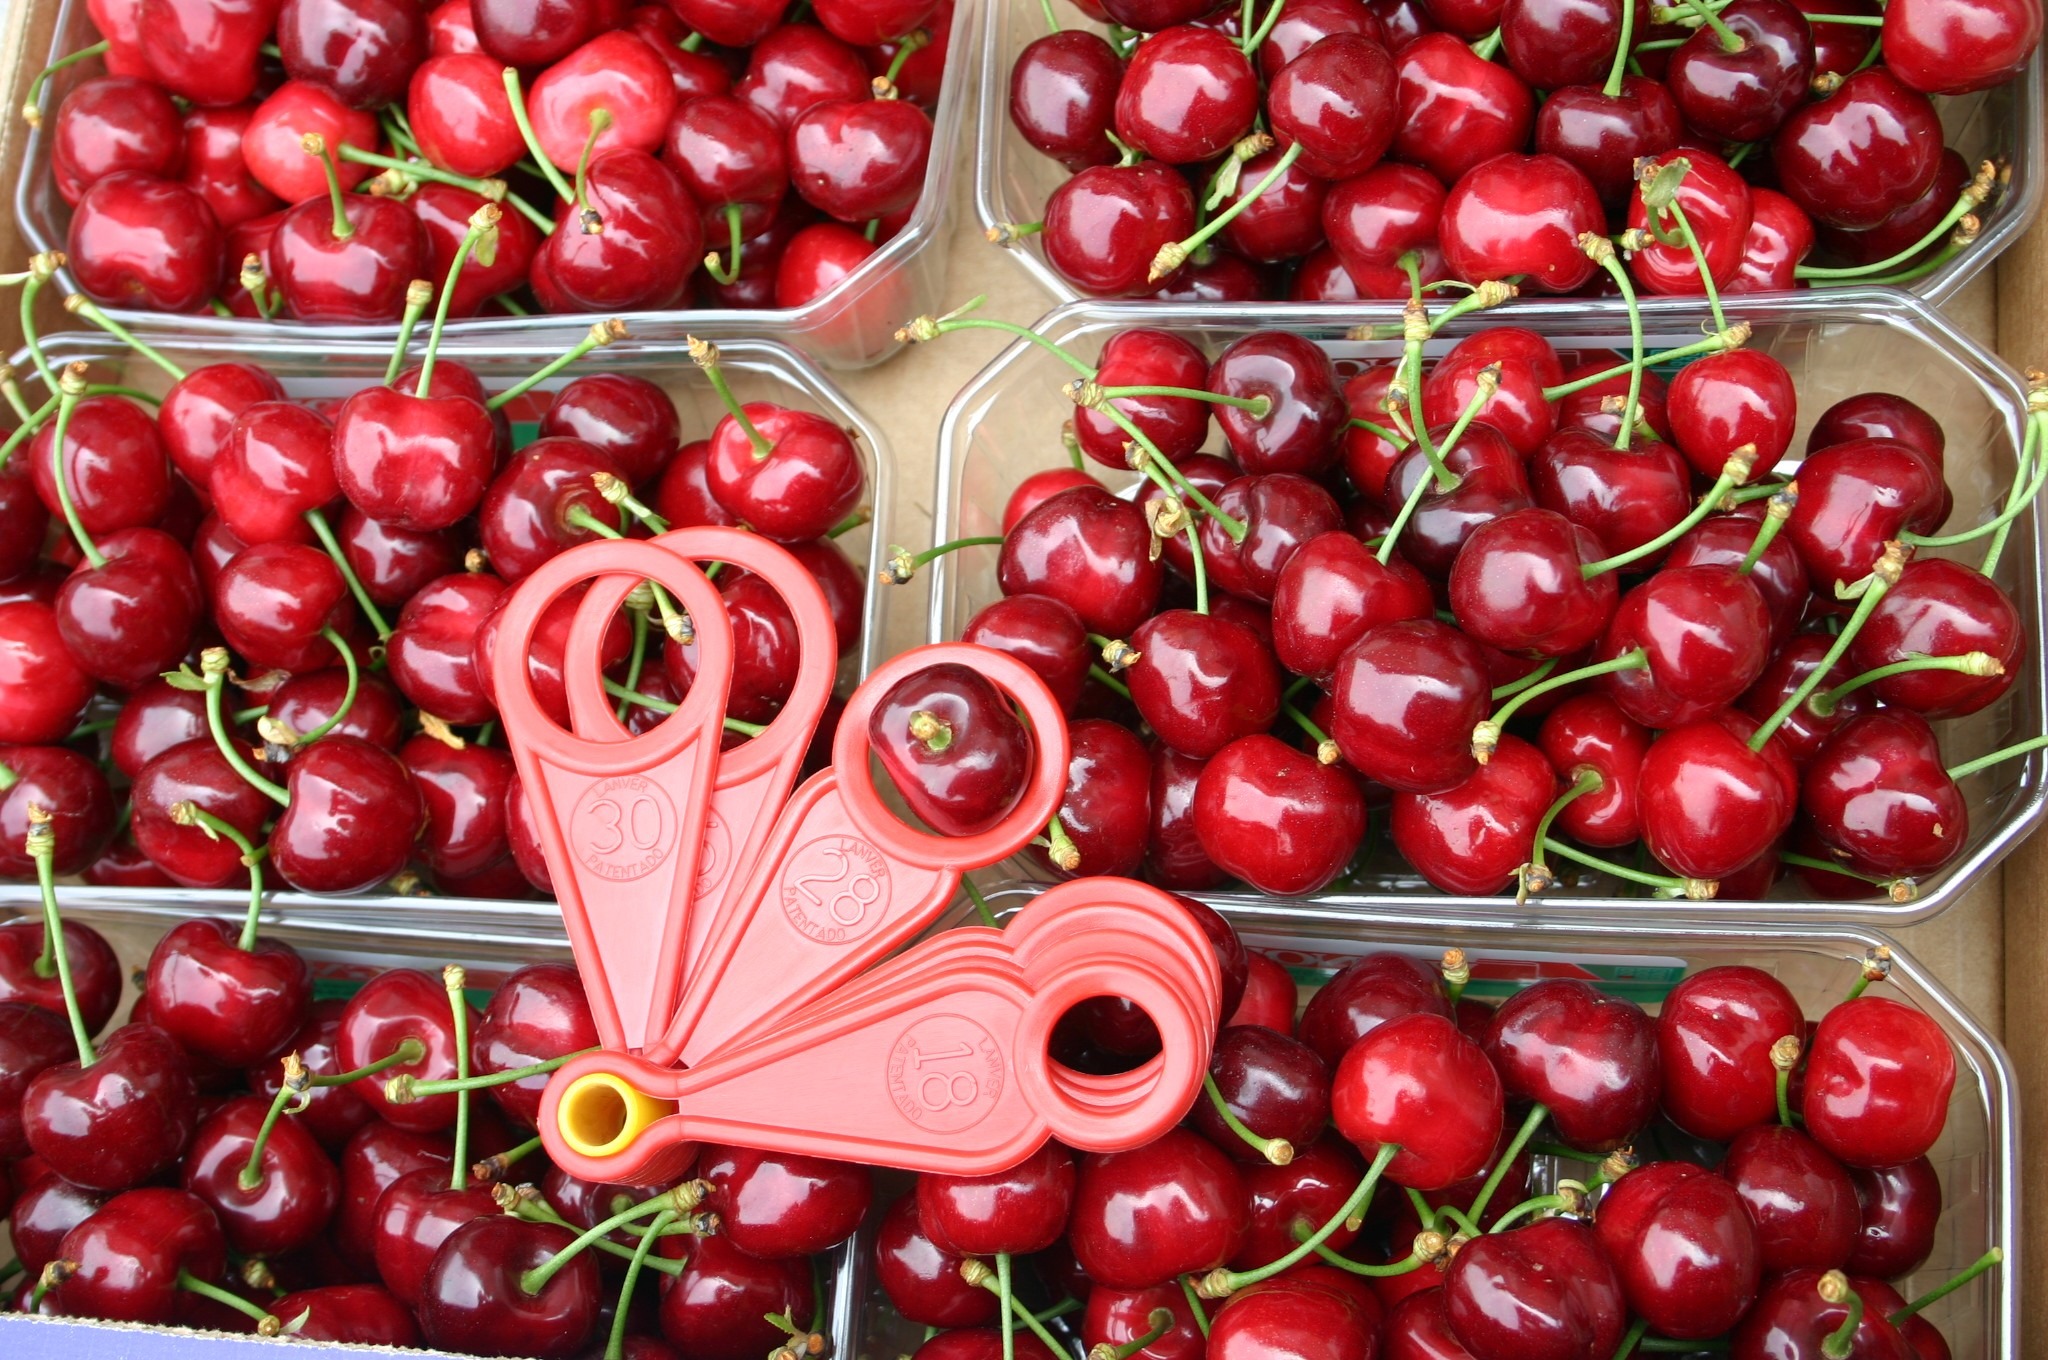 Conference on cherry orchards innovation in Verona on 5 March